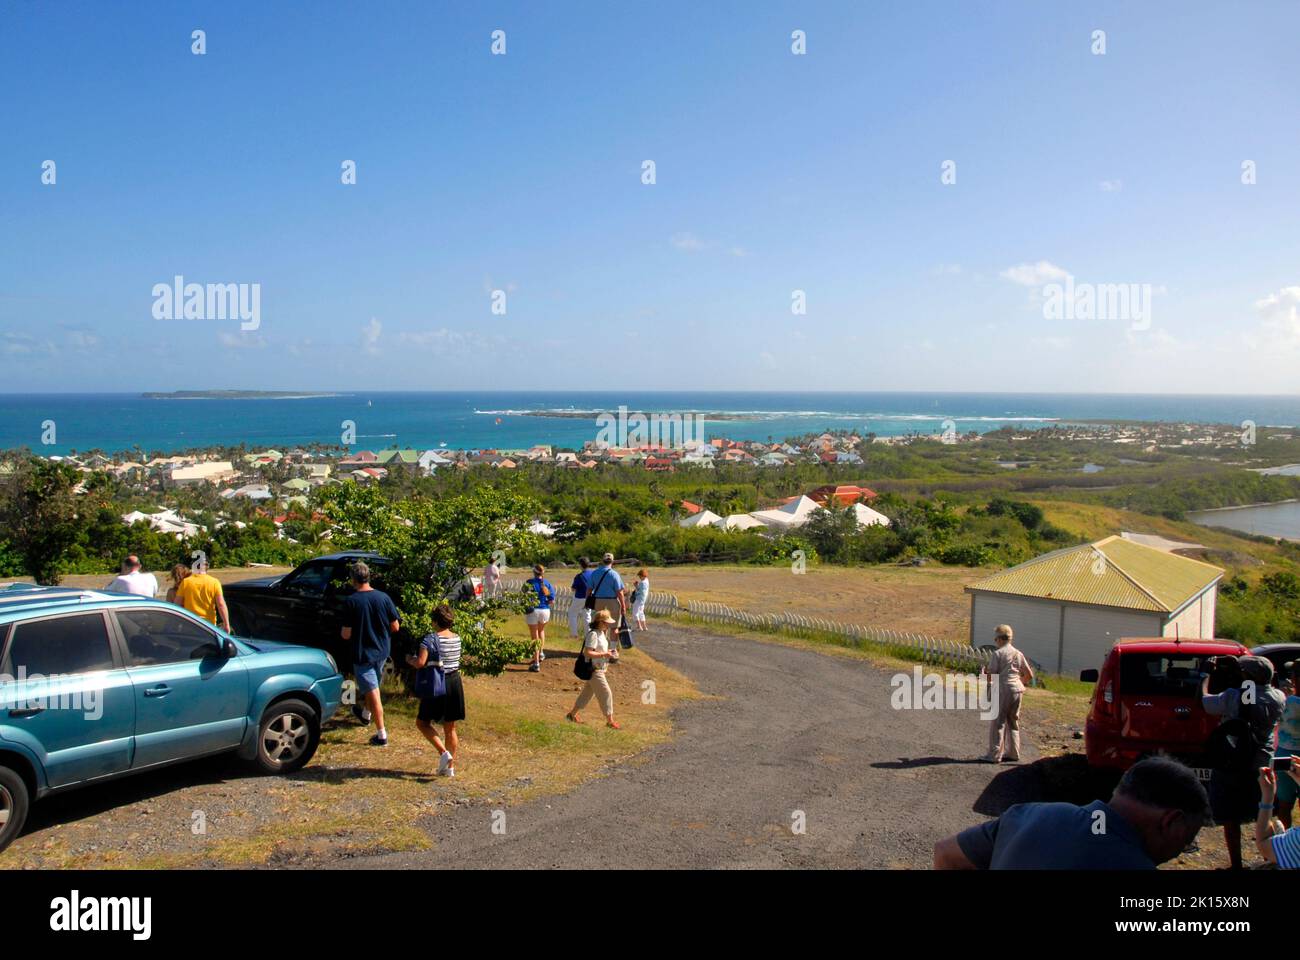 View overlooking low houses and the sea, St Martin/St Maarten Caribbean Stock Photo